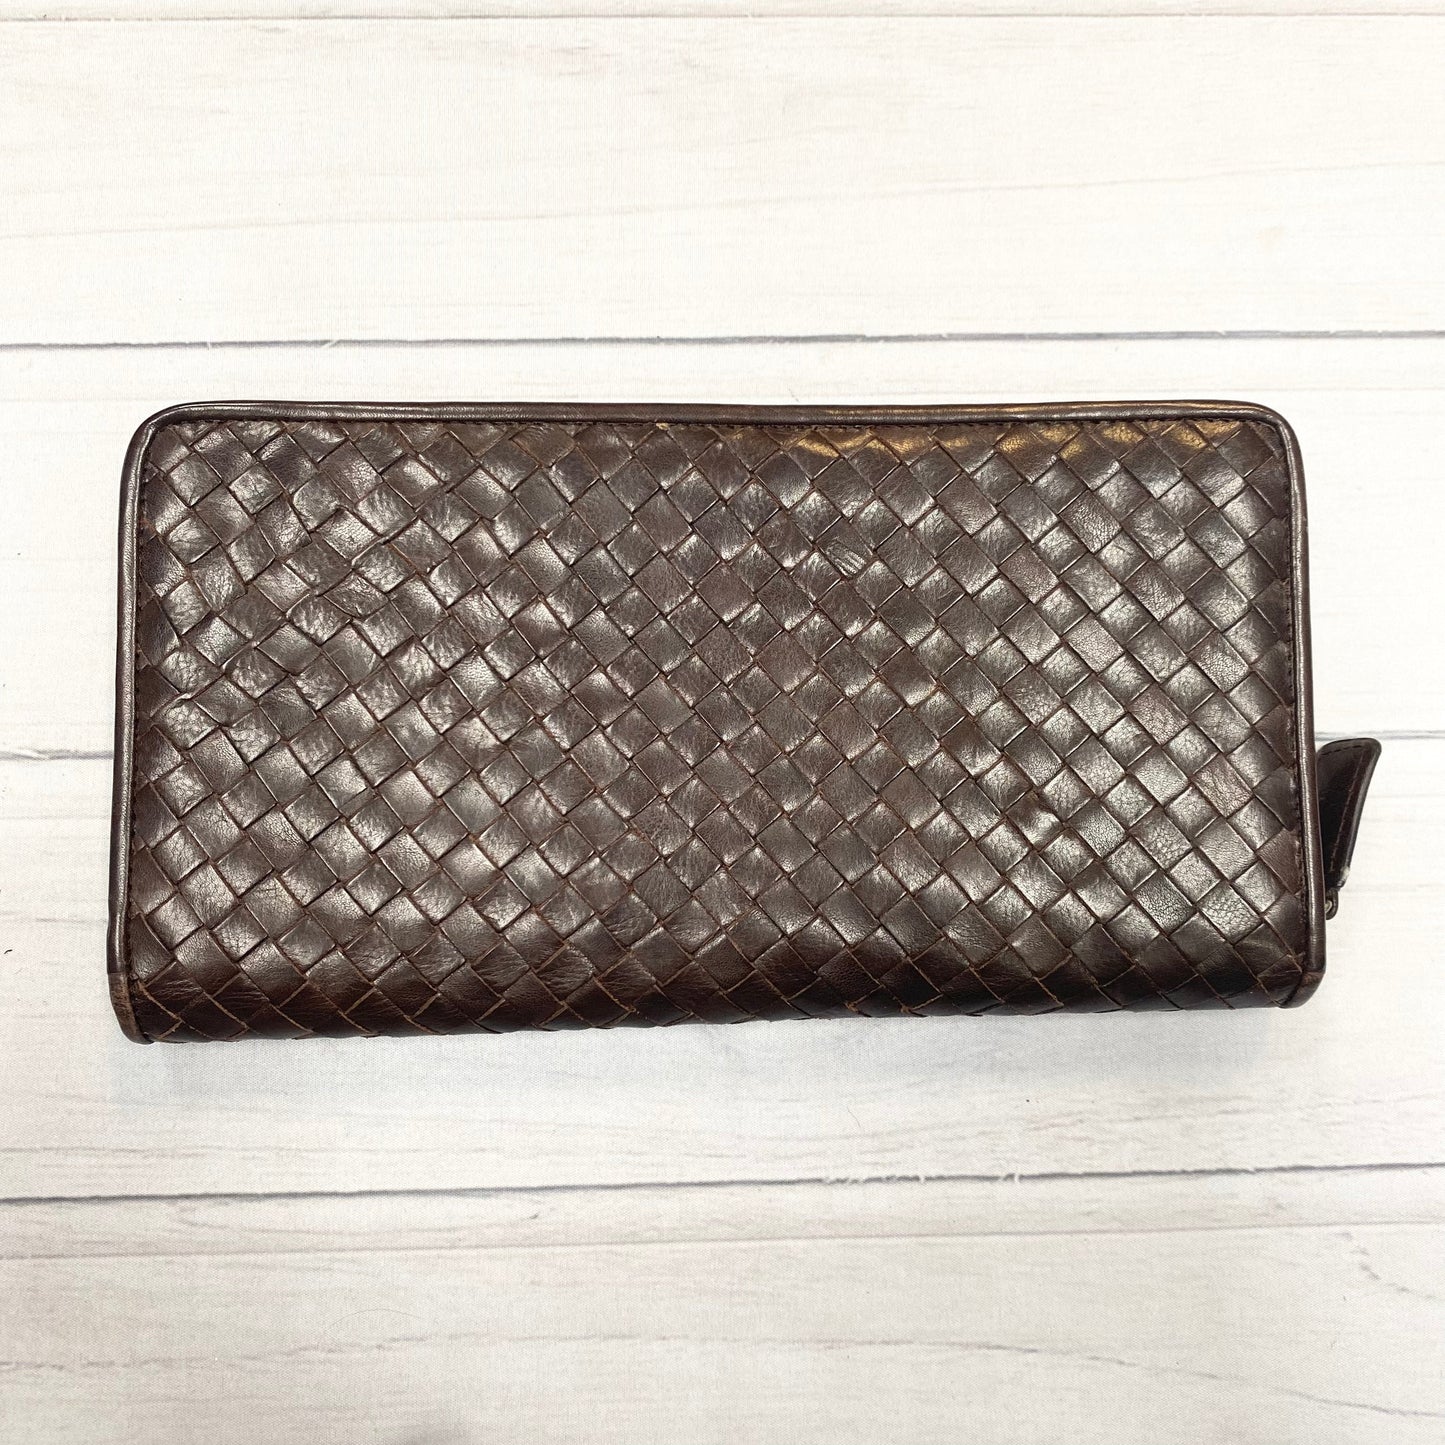 Clutch Designer By Cole-haan  Size: Large